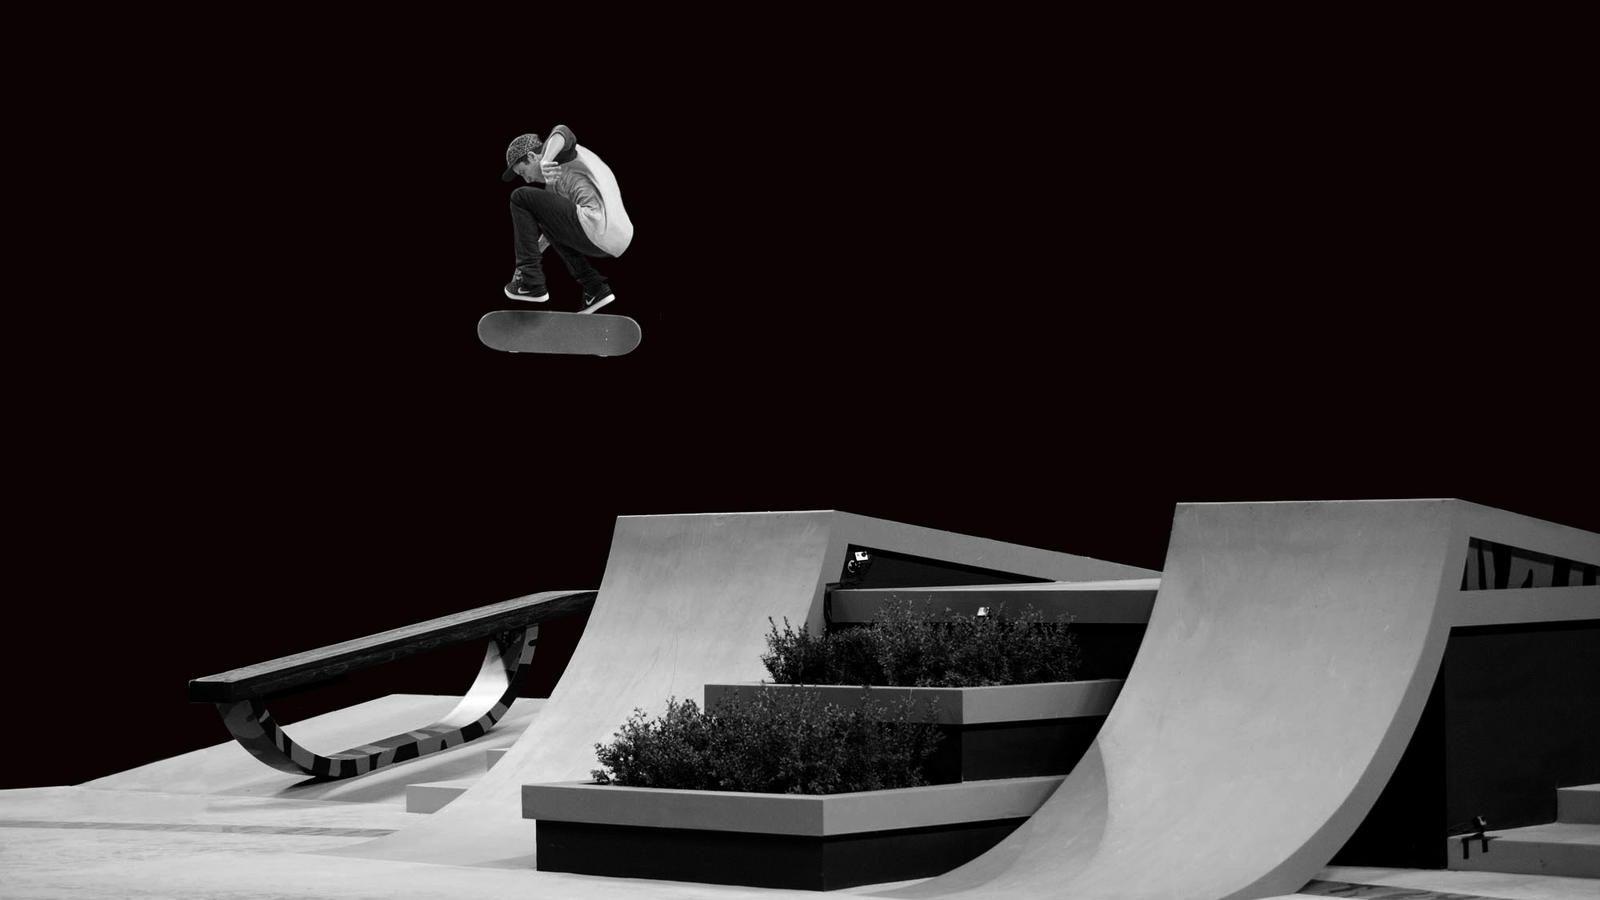 Four Nike SB Riders to Battle it Out at SLS Nike SB World Tour